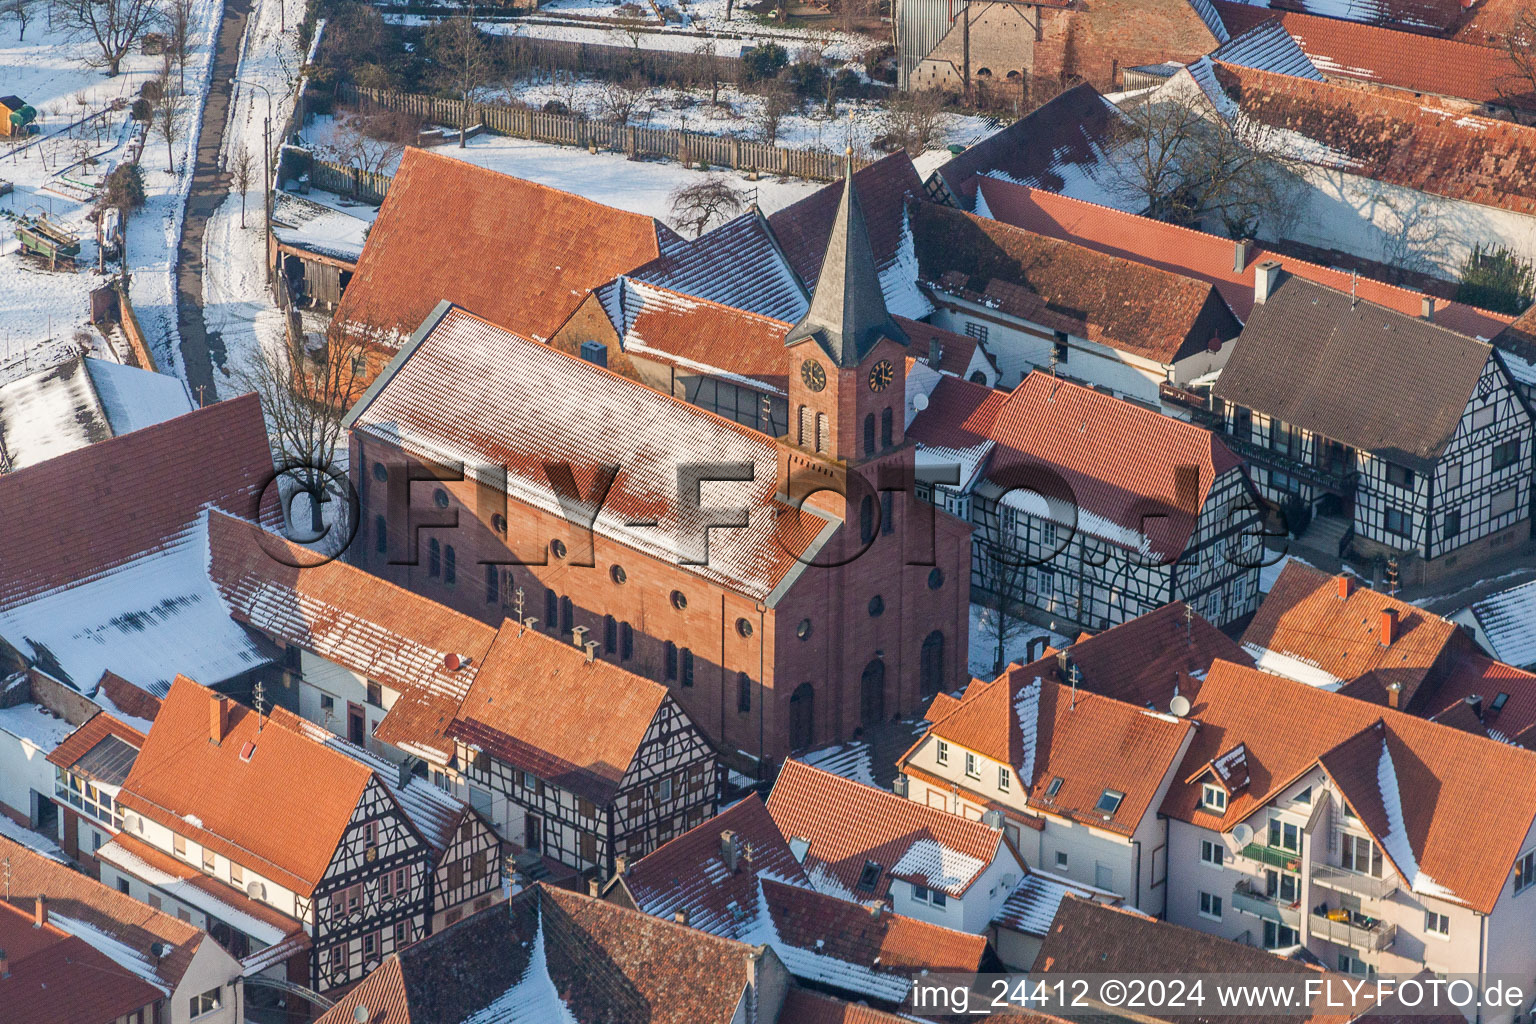 Aerial view of Wintry snowy Evangelic Church building in the village of in Steinweiler in the state Rhineland-Palatinate, Germany